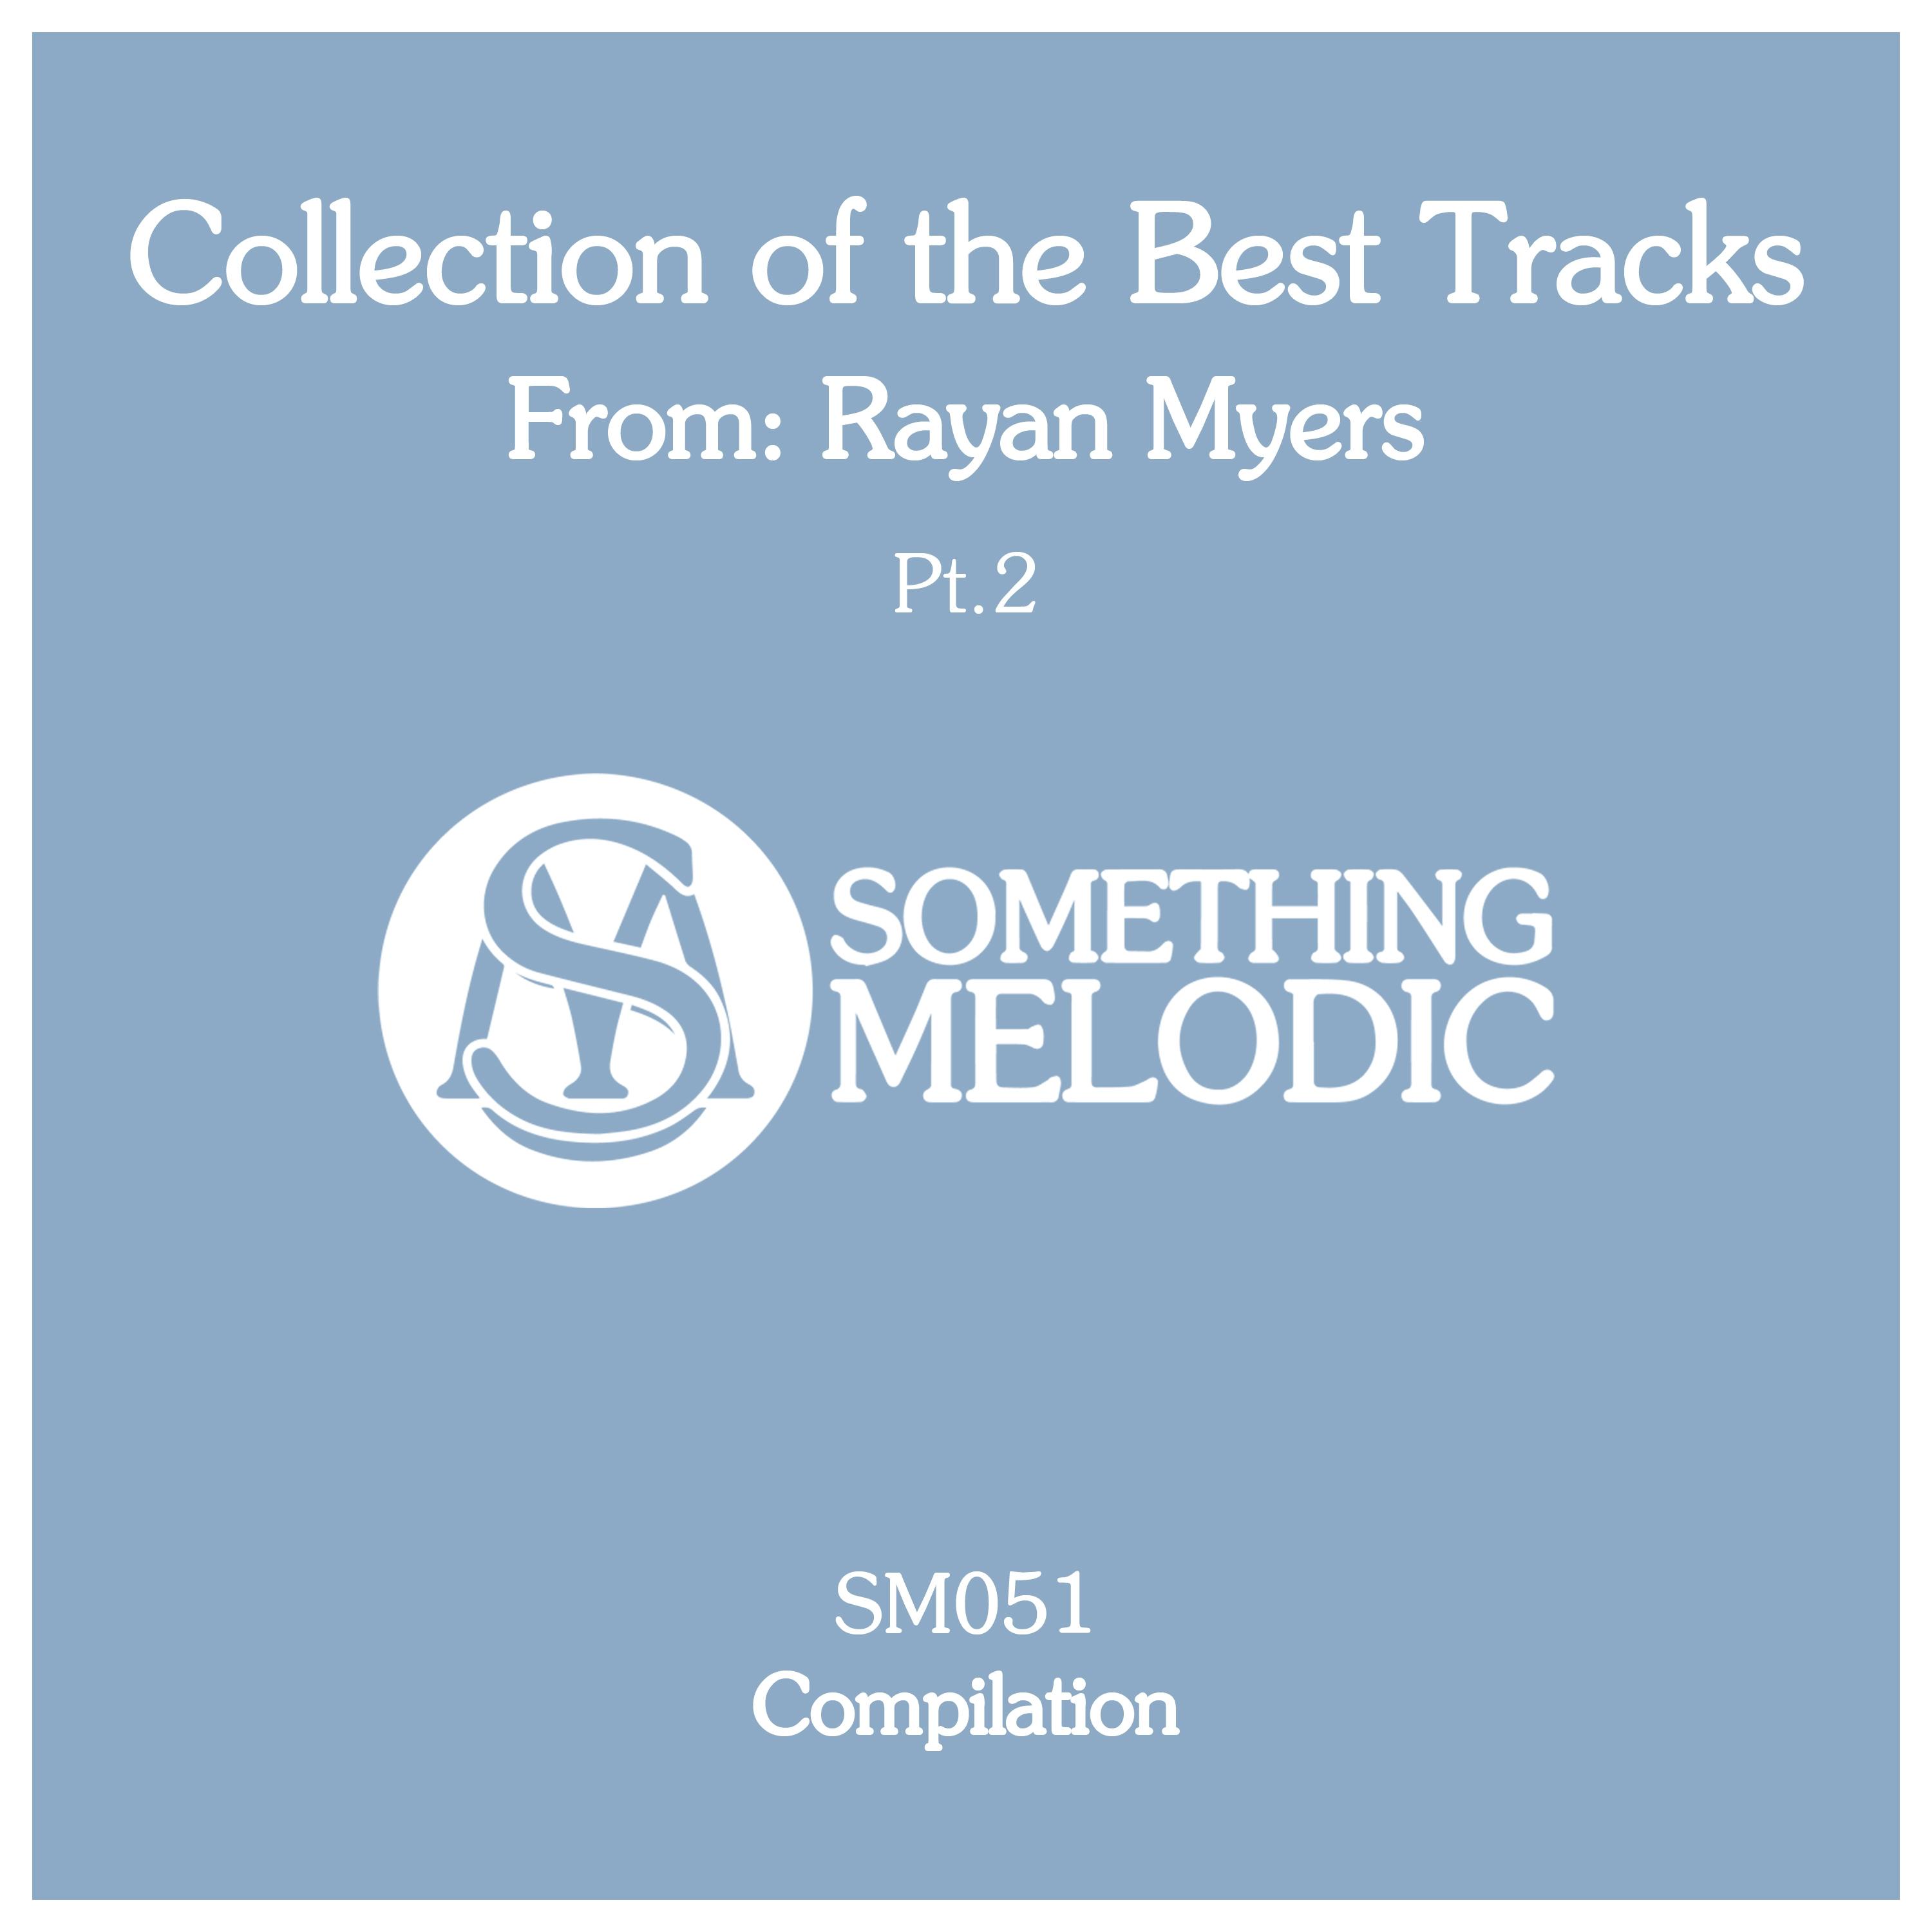 Collection of the Best Tracks From: Rayan Myers, Pt. 2